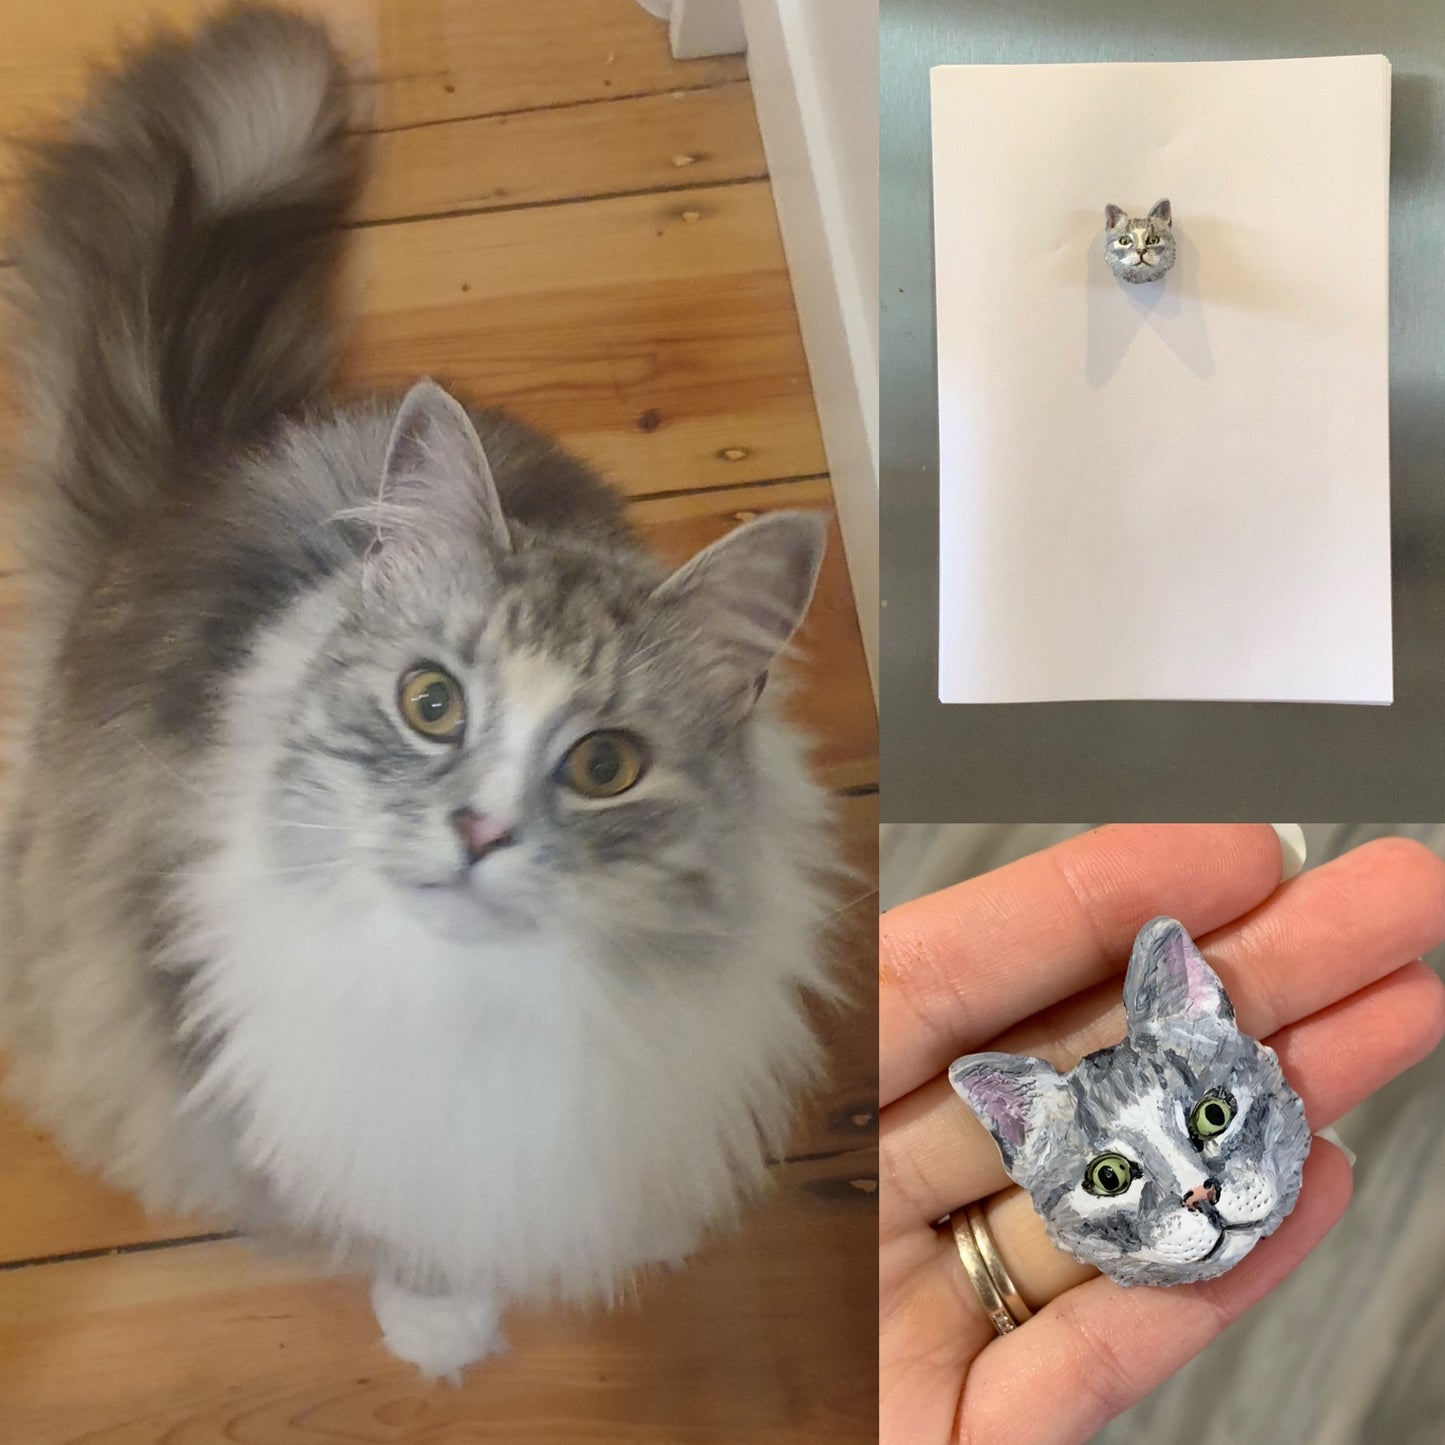 Handmade polymer clay pet memorial fridge magnet, made to look like a fluffy grey and white cat..